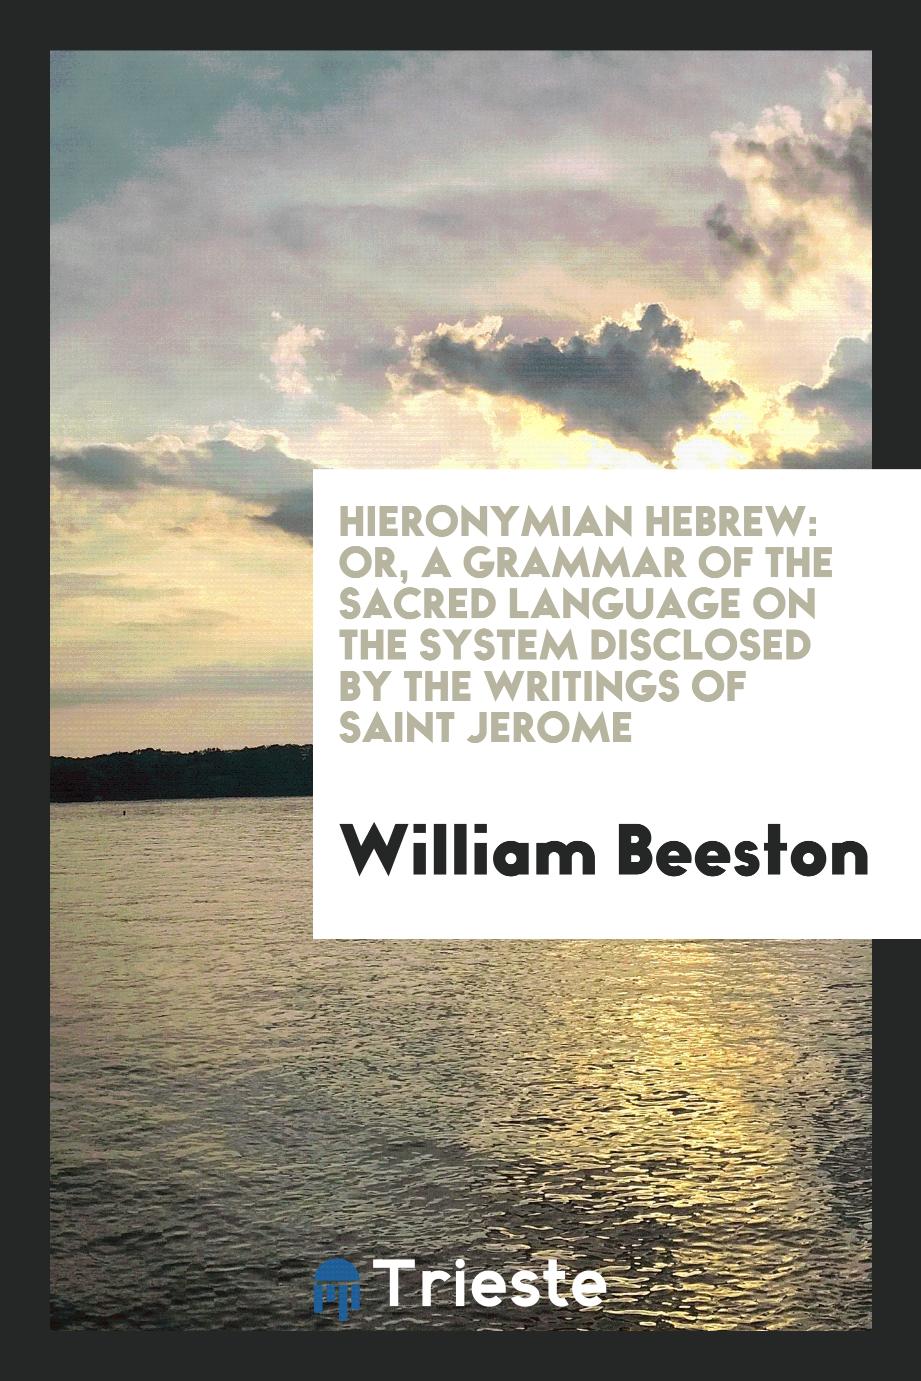 Hieronymian Hebrew: Or, a Grammar of the Sacred Language on the System Disclosed by the Writings of Saint Jerome